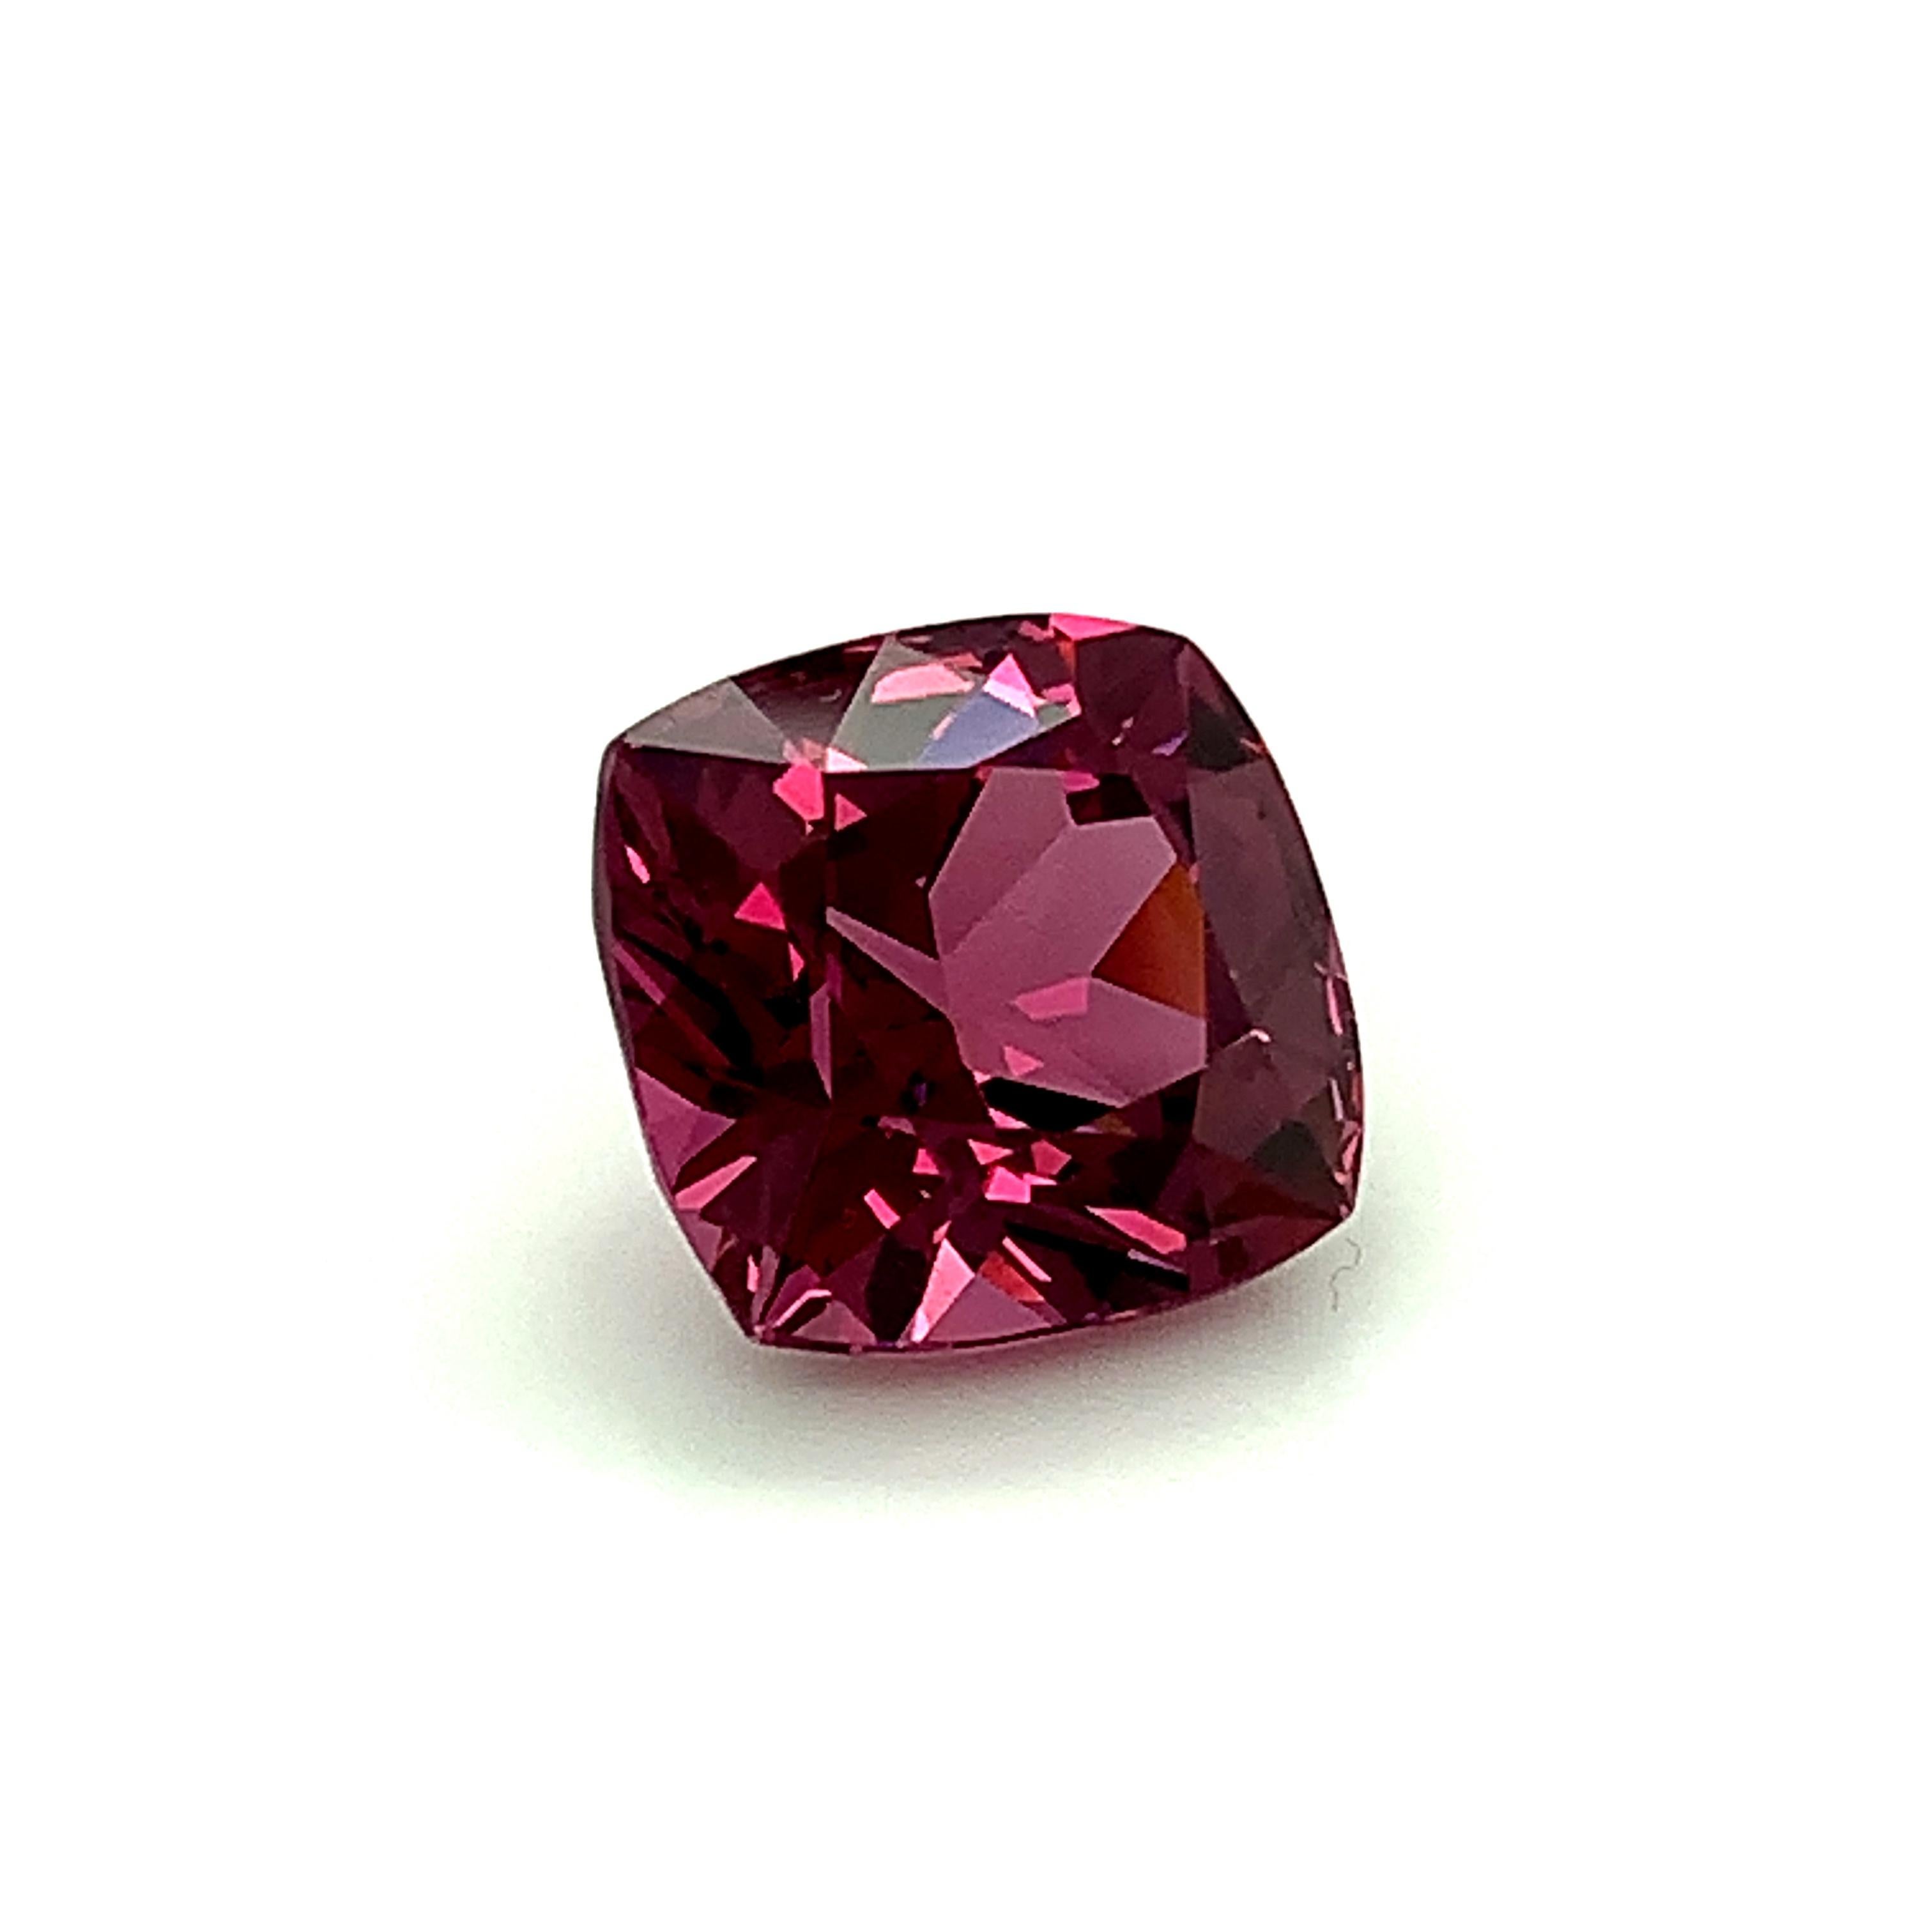 Cushion Cut Unheated 9.26 Carat Purple Pink Spinel Cushion, Loose Gemstone, GIA Certified .A For Sale